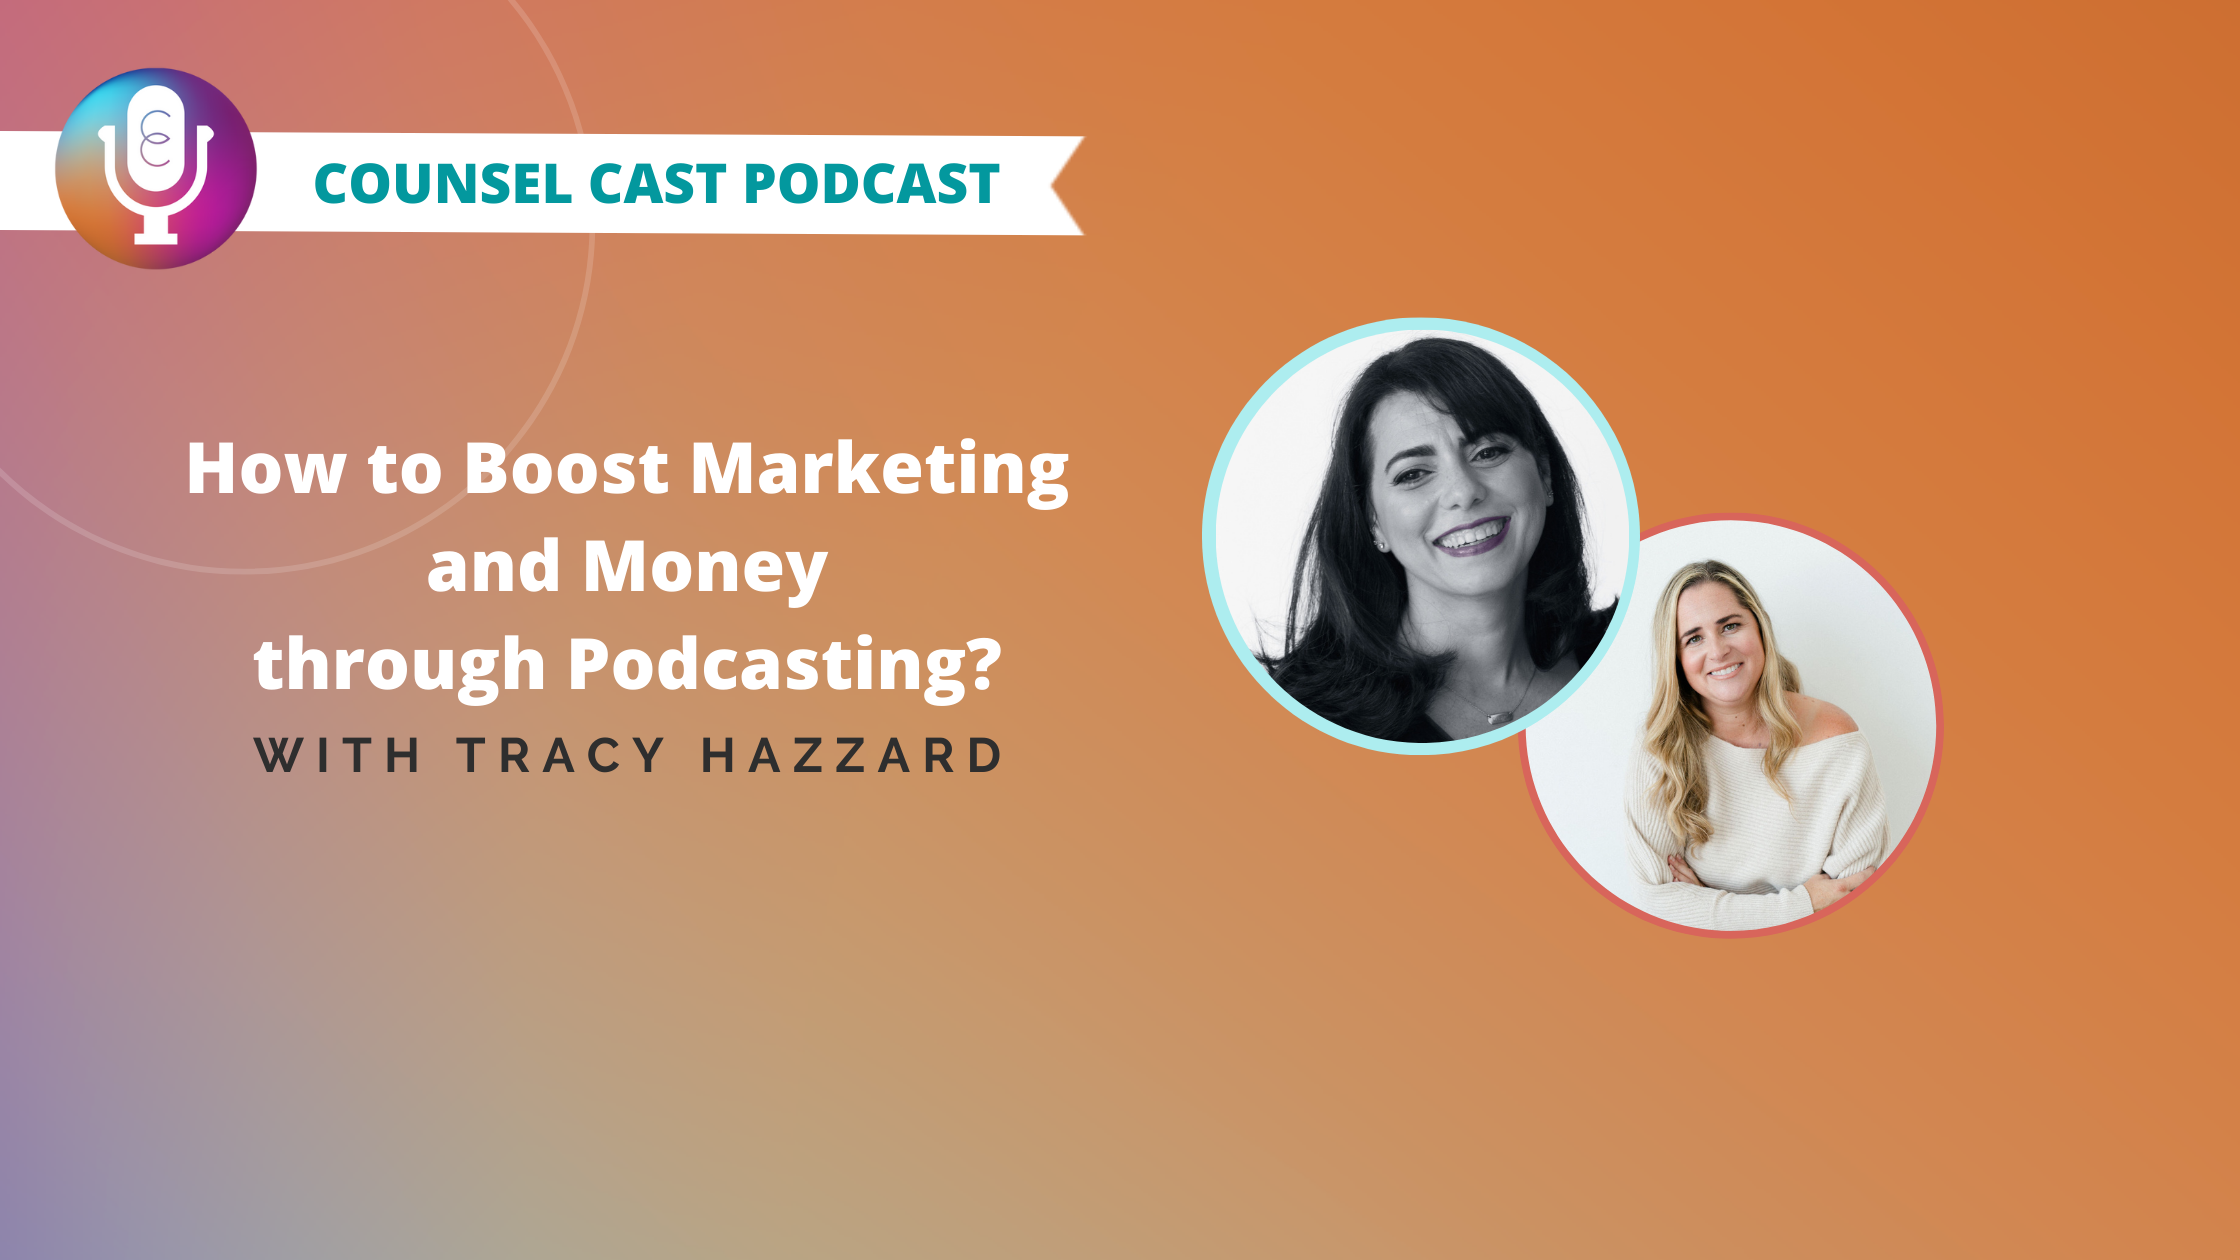 How to Boost Your Marketing and Money through Podcasting? Featuring Tracy Hazzard